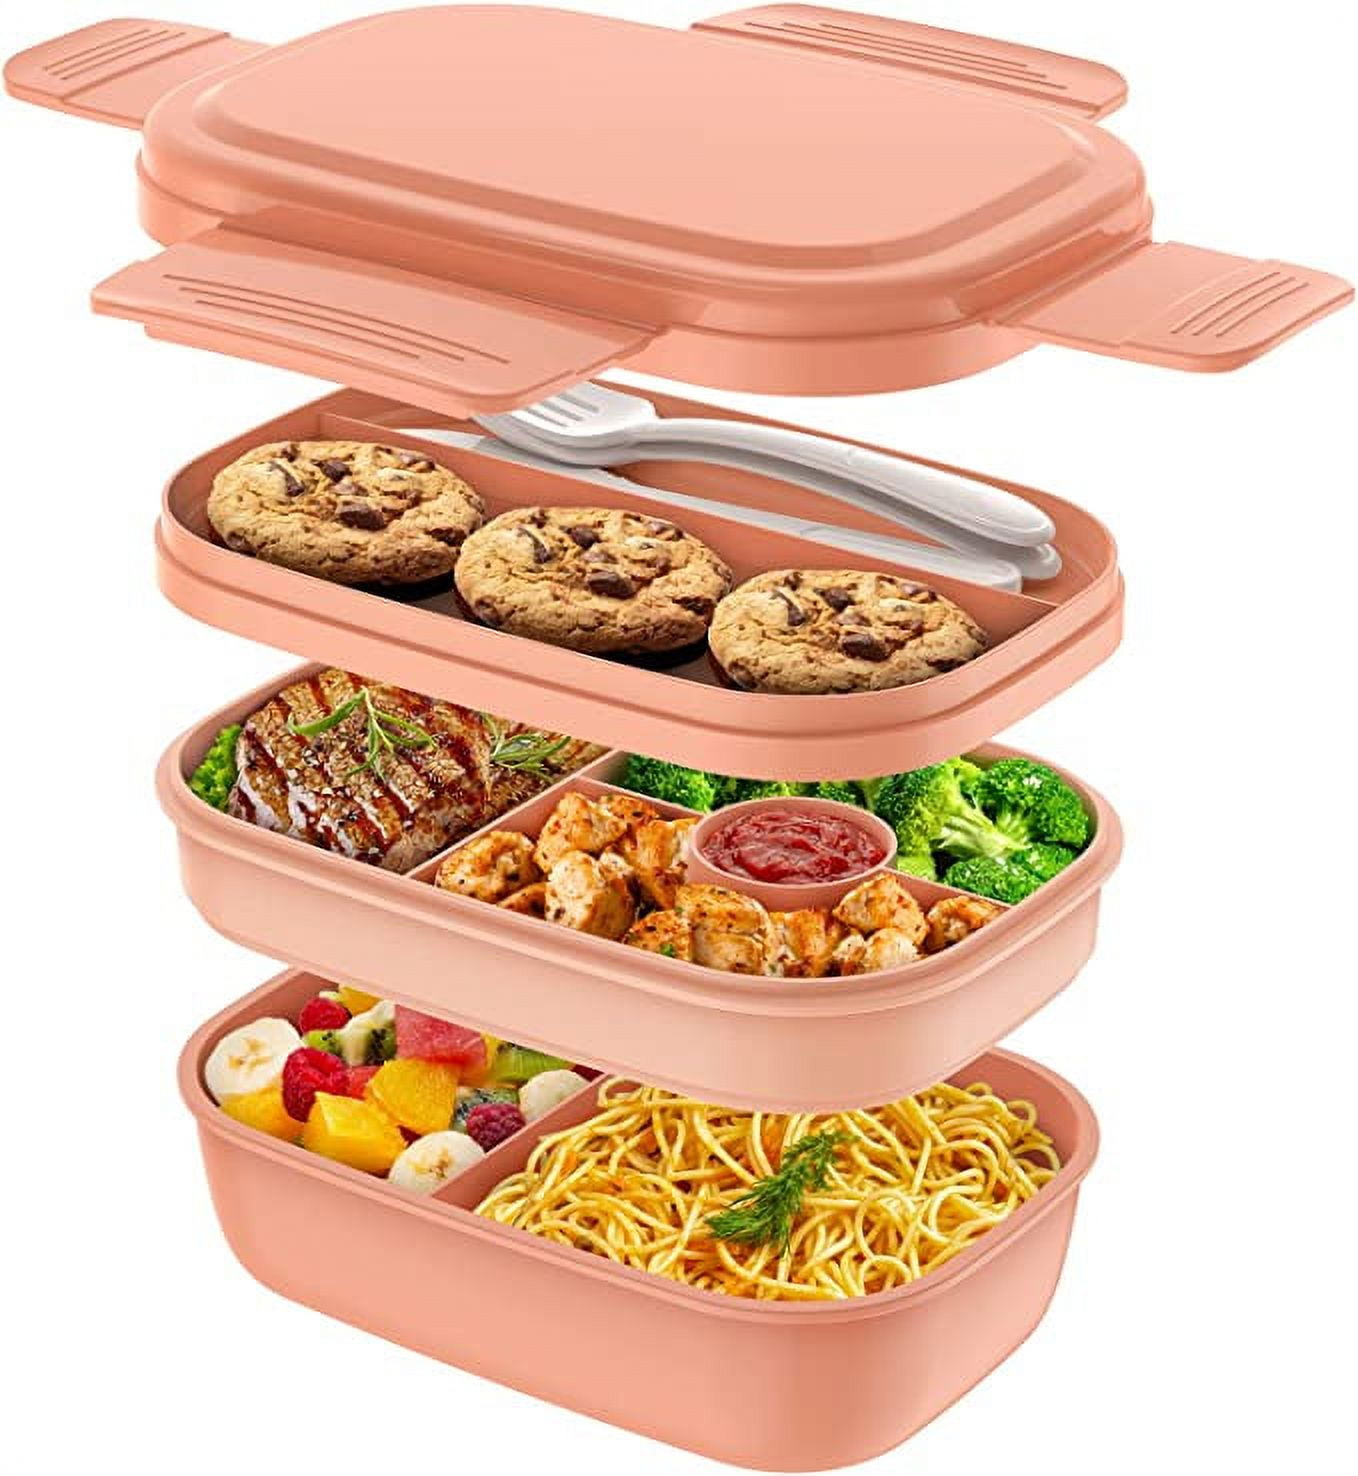 Leak Proof Bento Lunch Box ,with Utensils Stainless Steel Lunch